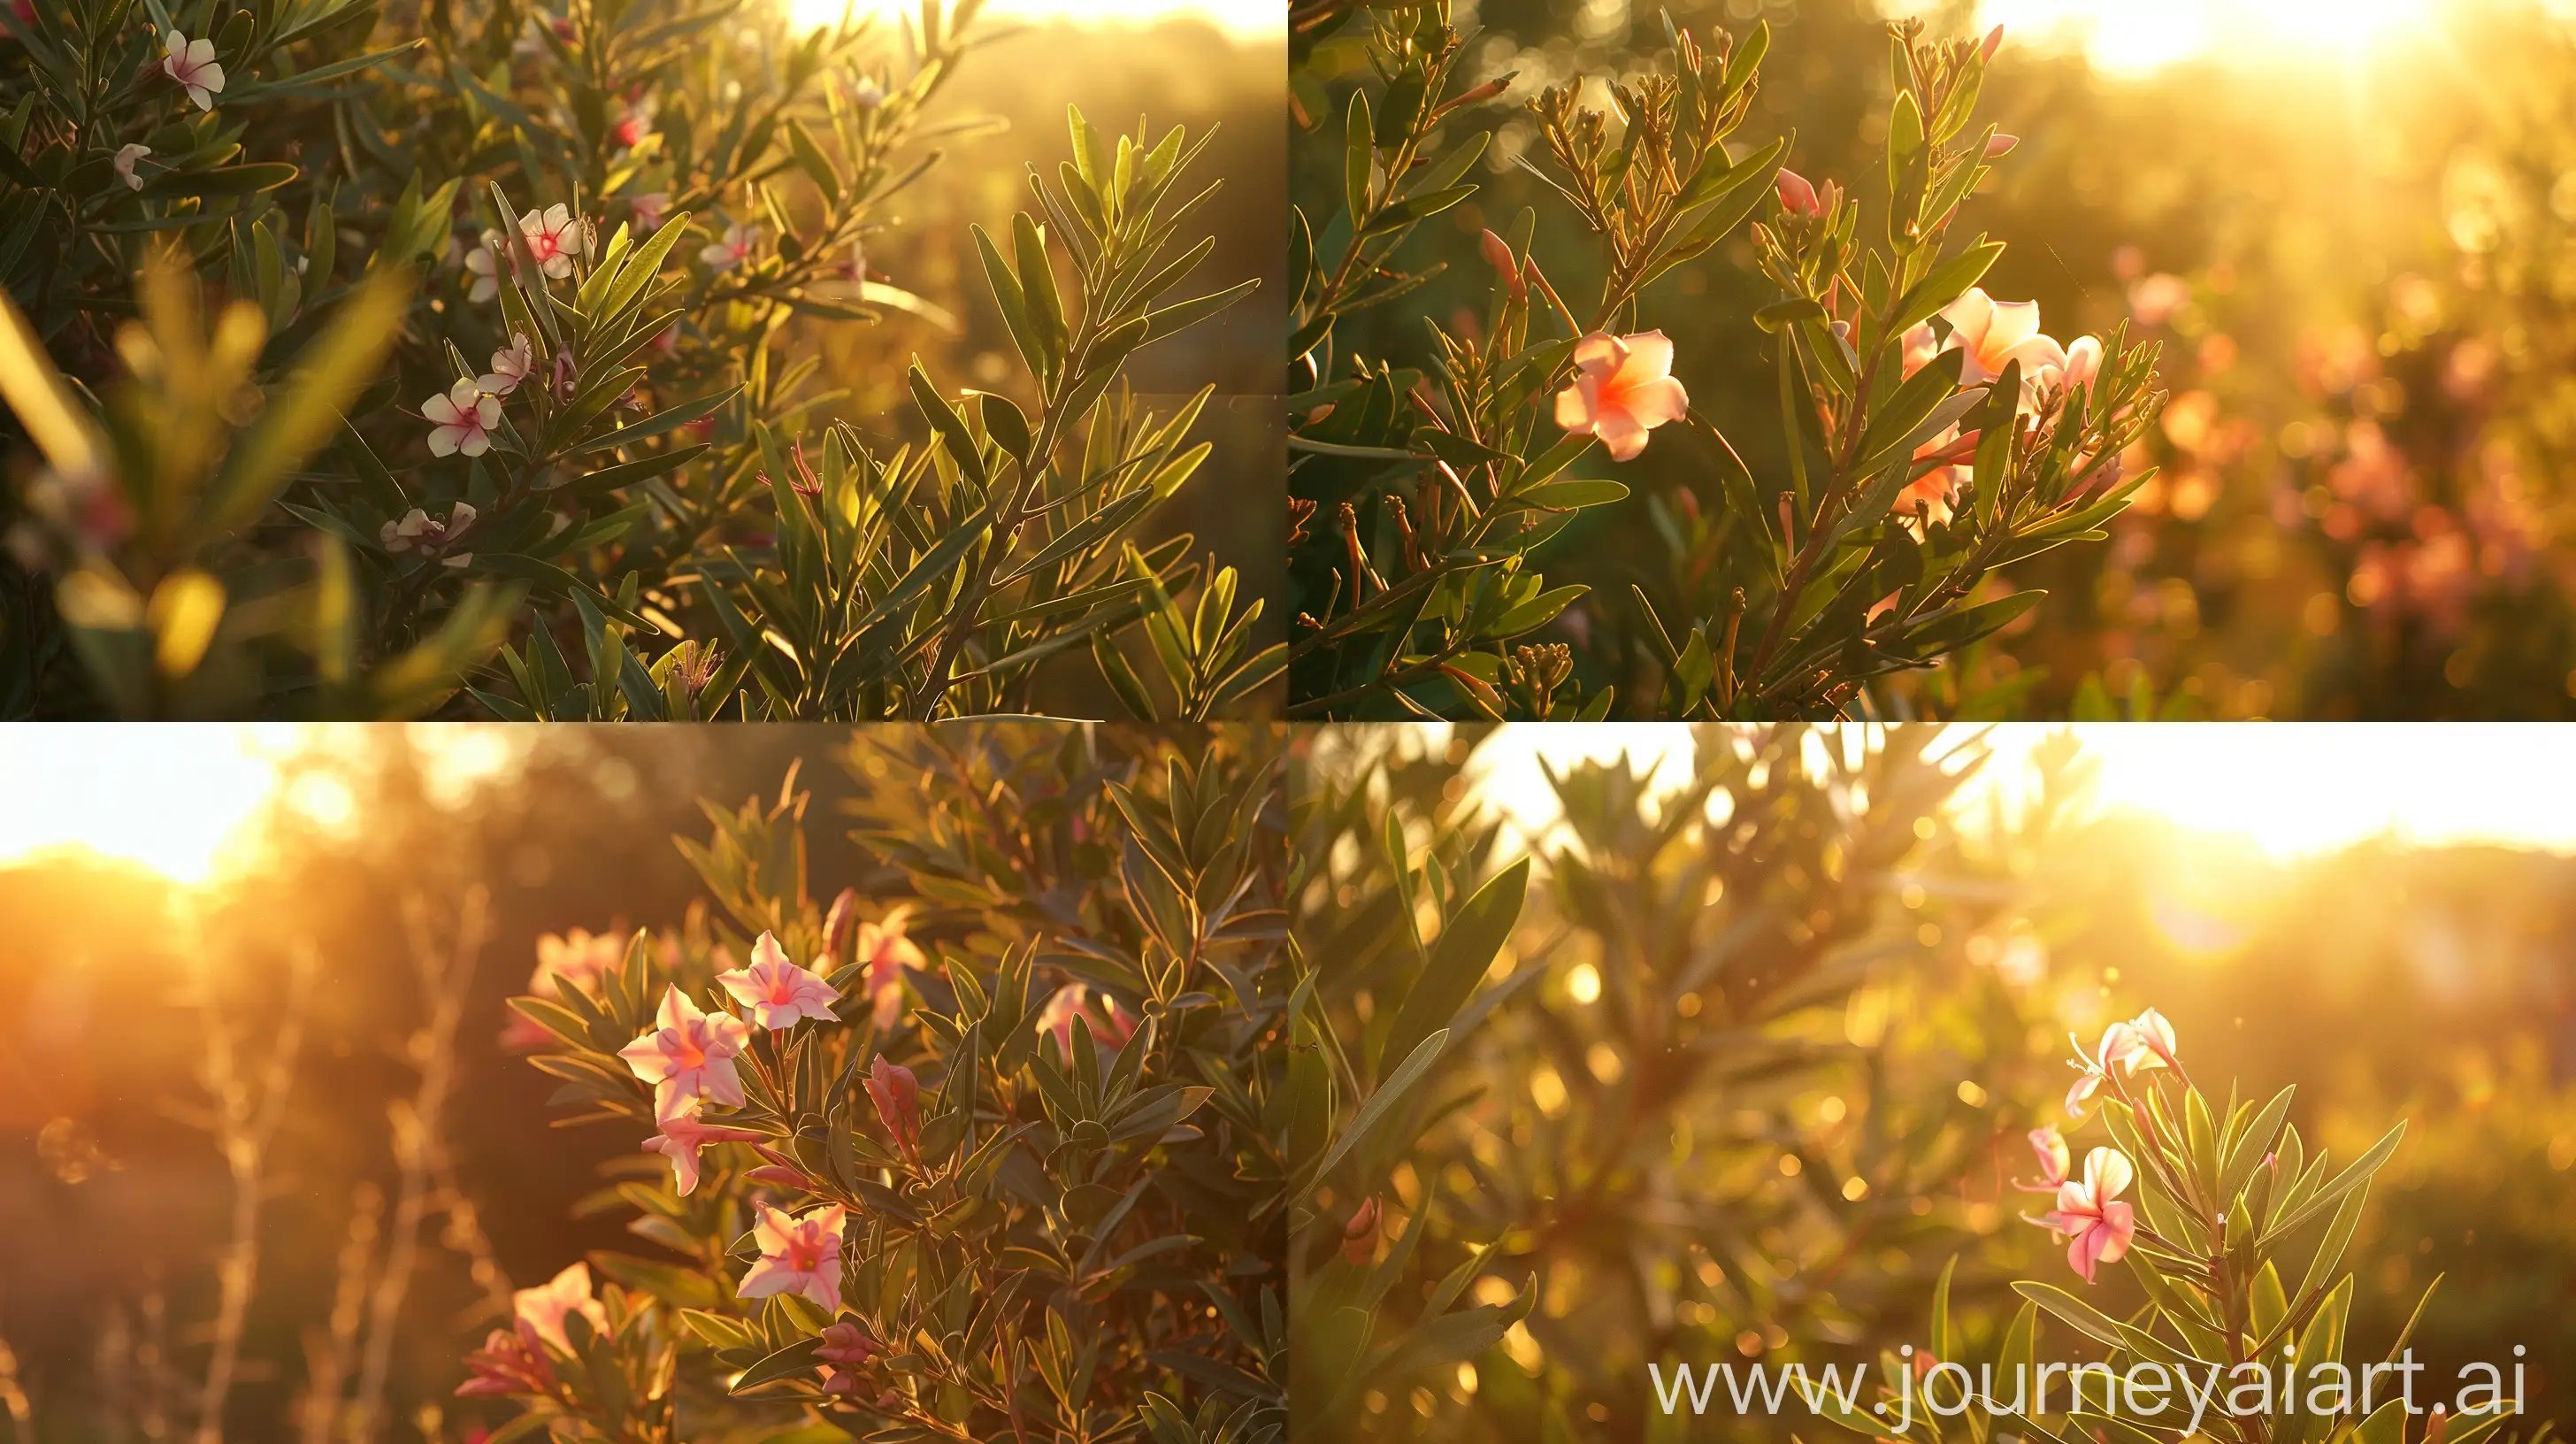 High detailed photo capturing a Oleander, Austin Pretty Limits. The sun, casting a warm, golden glow, bathes the scene in a serene ambiance, illuminating the intricate details of each element. The composition centers on a Oleander, Austin Pretty Limits. Selected by Kevin Hurd of Austin, Texas, ‘Austin Pretty Limits’ is super floriferous and the perfect plants for hot climate. These evergreen shrubs thrive with little care and are very tolerant of heat and drought, rabbits, armadillos, air pollution, salt. The image evokes a sense of tranquility and natural beauty, inviting viewers to immerse themselves in the splendor of the landscape. --ar 16:9 